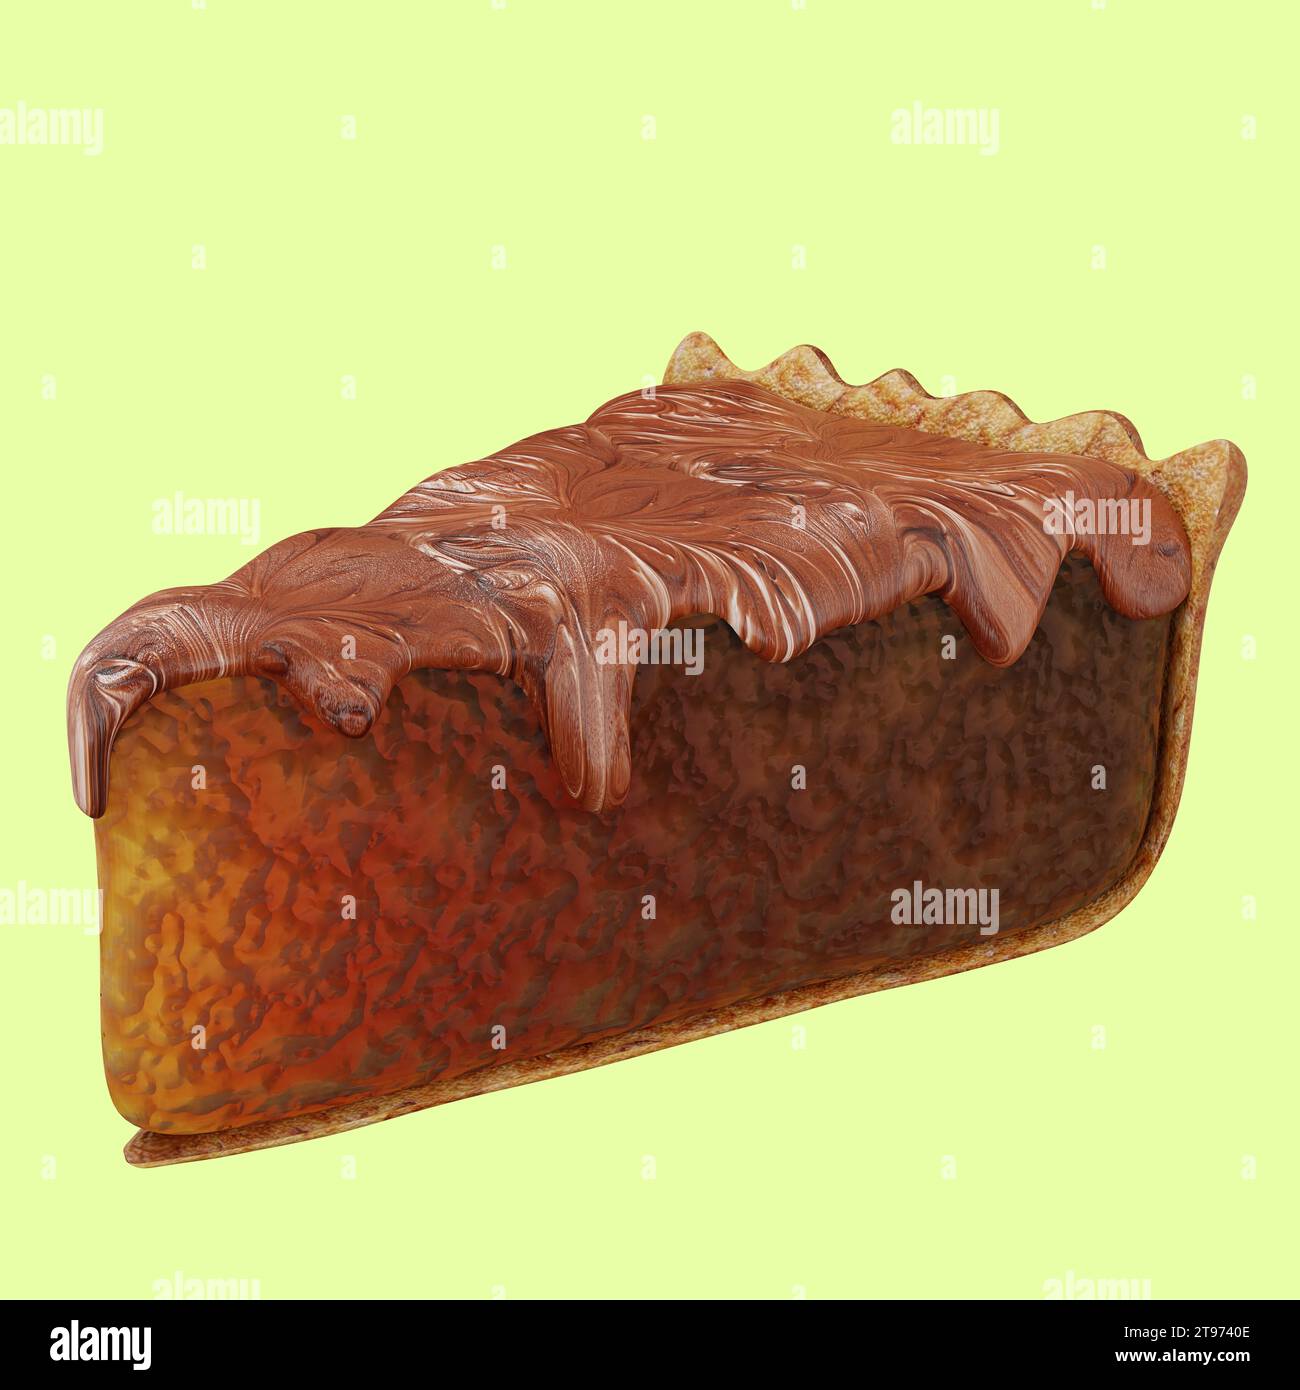 Decadent Brownie: Fudgy perfection with a melt-in-your-mouth texture, a chocolate lover's dream. Stock Photo